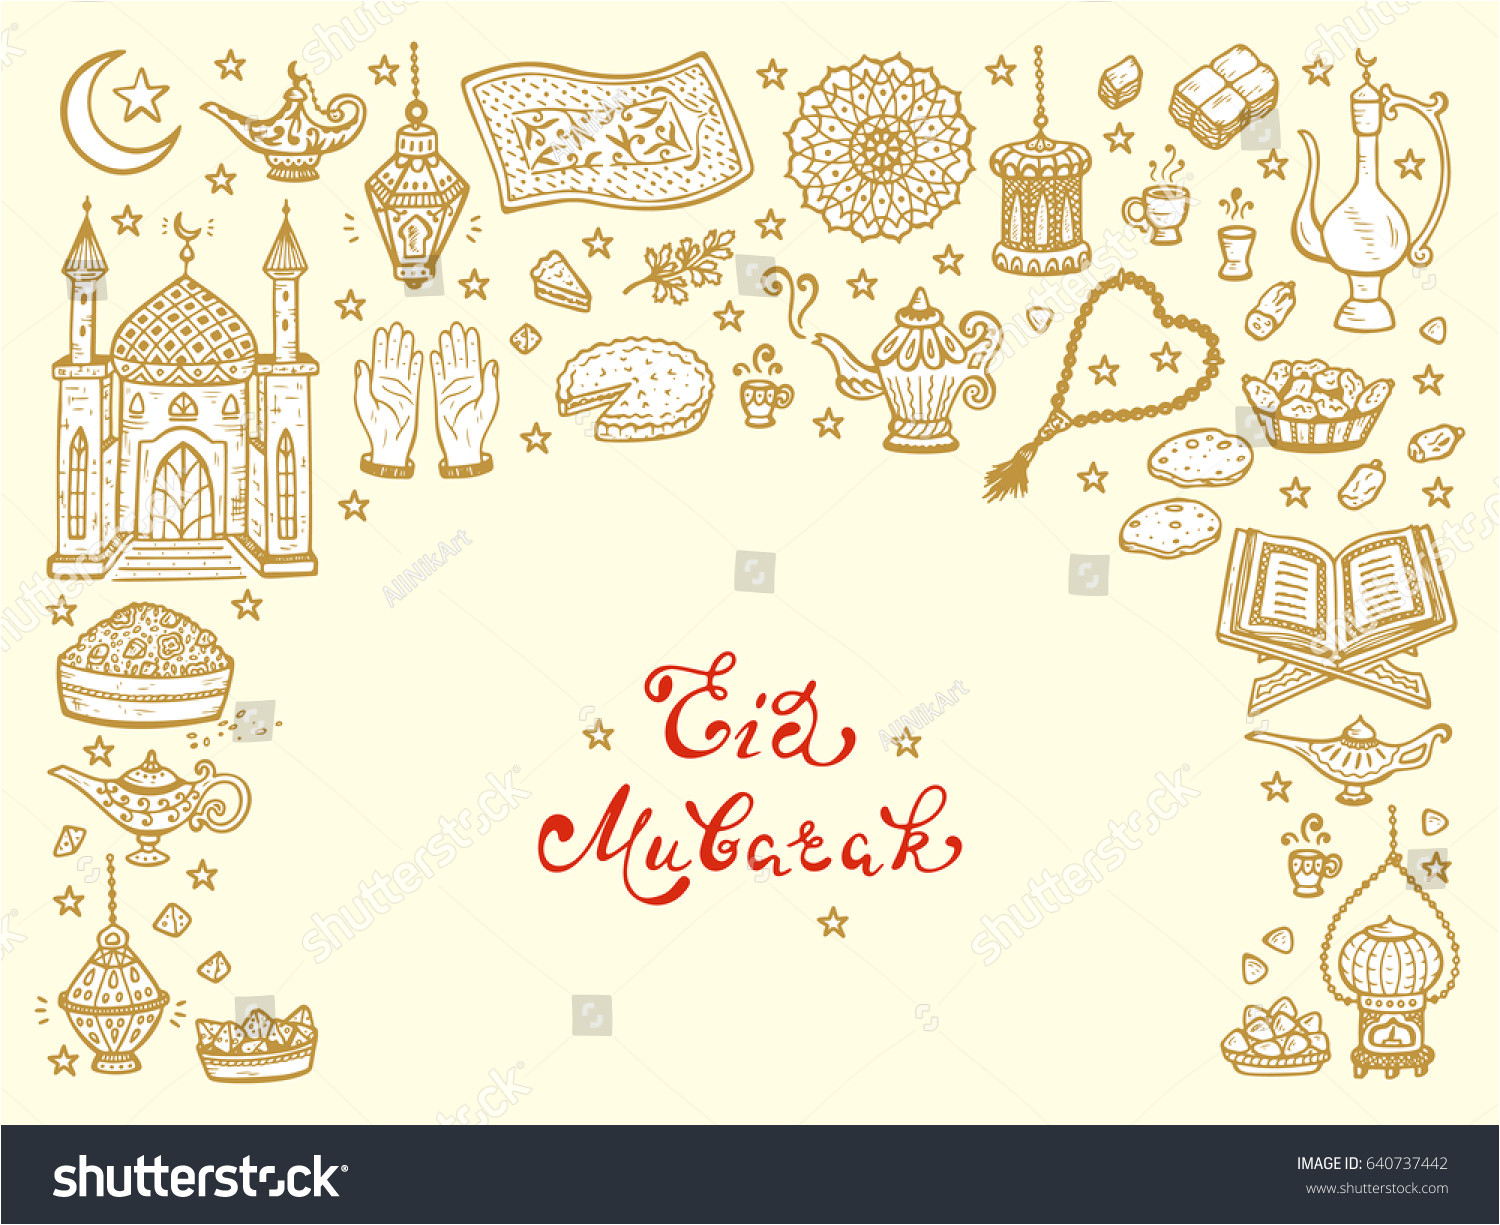 stock vector eid mubarak calligraphy lettering phrase and doodle traditional arabic items greeting card 640737442 jpg